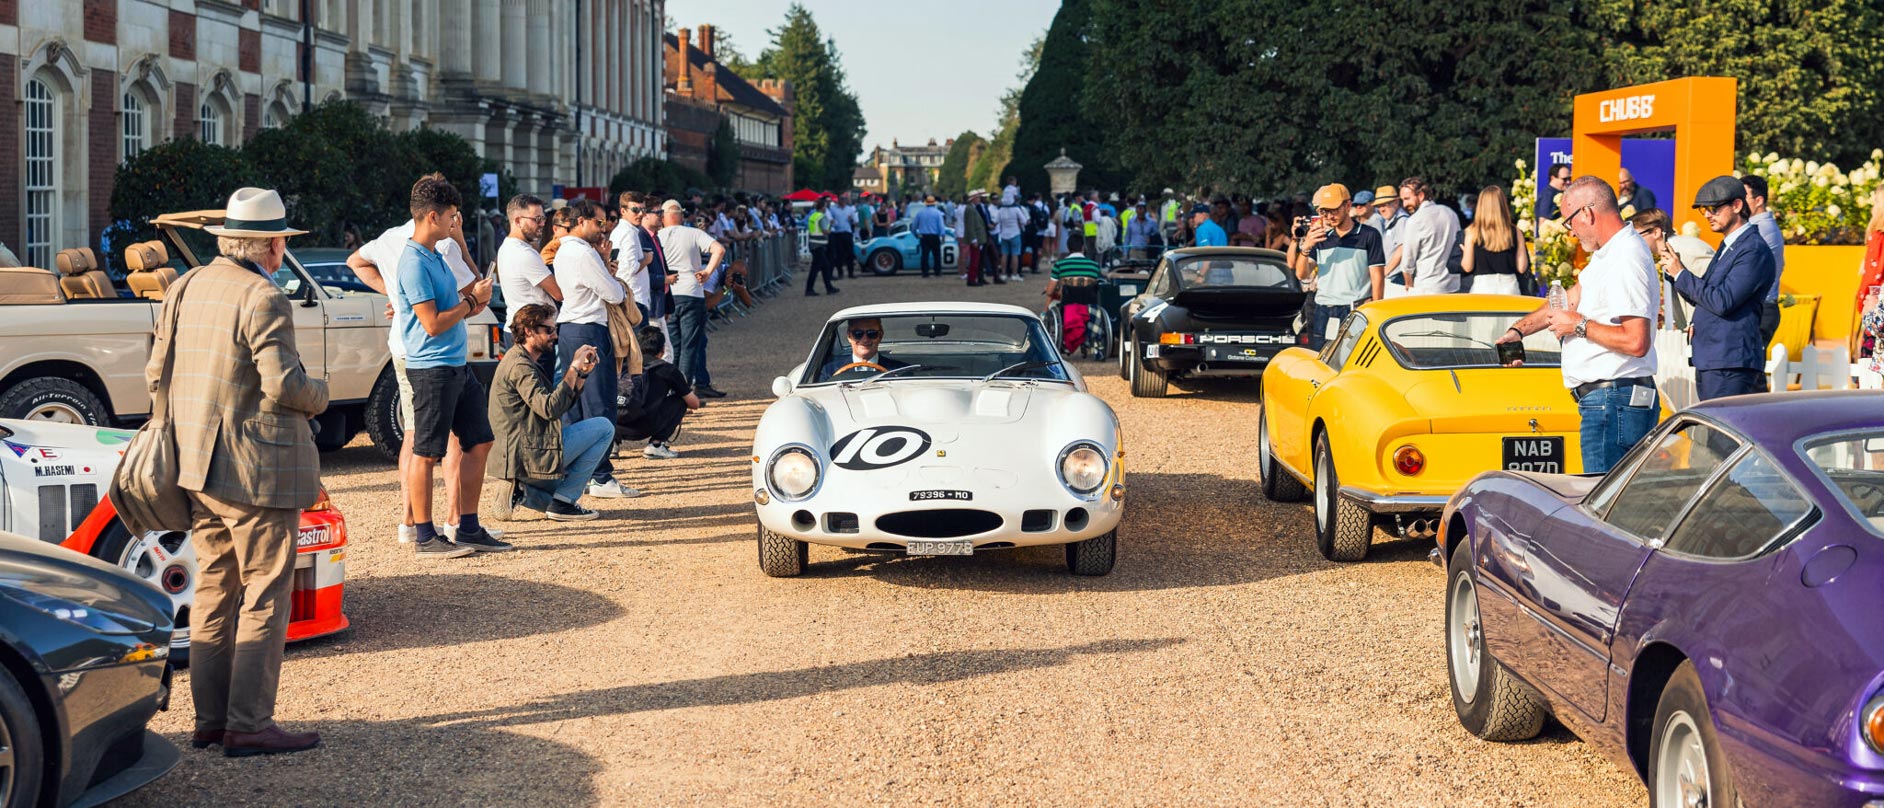 Cars Manoeuvring Around the Show in the Gardens of Hampton Court Palace